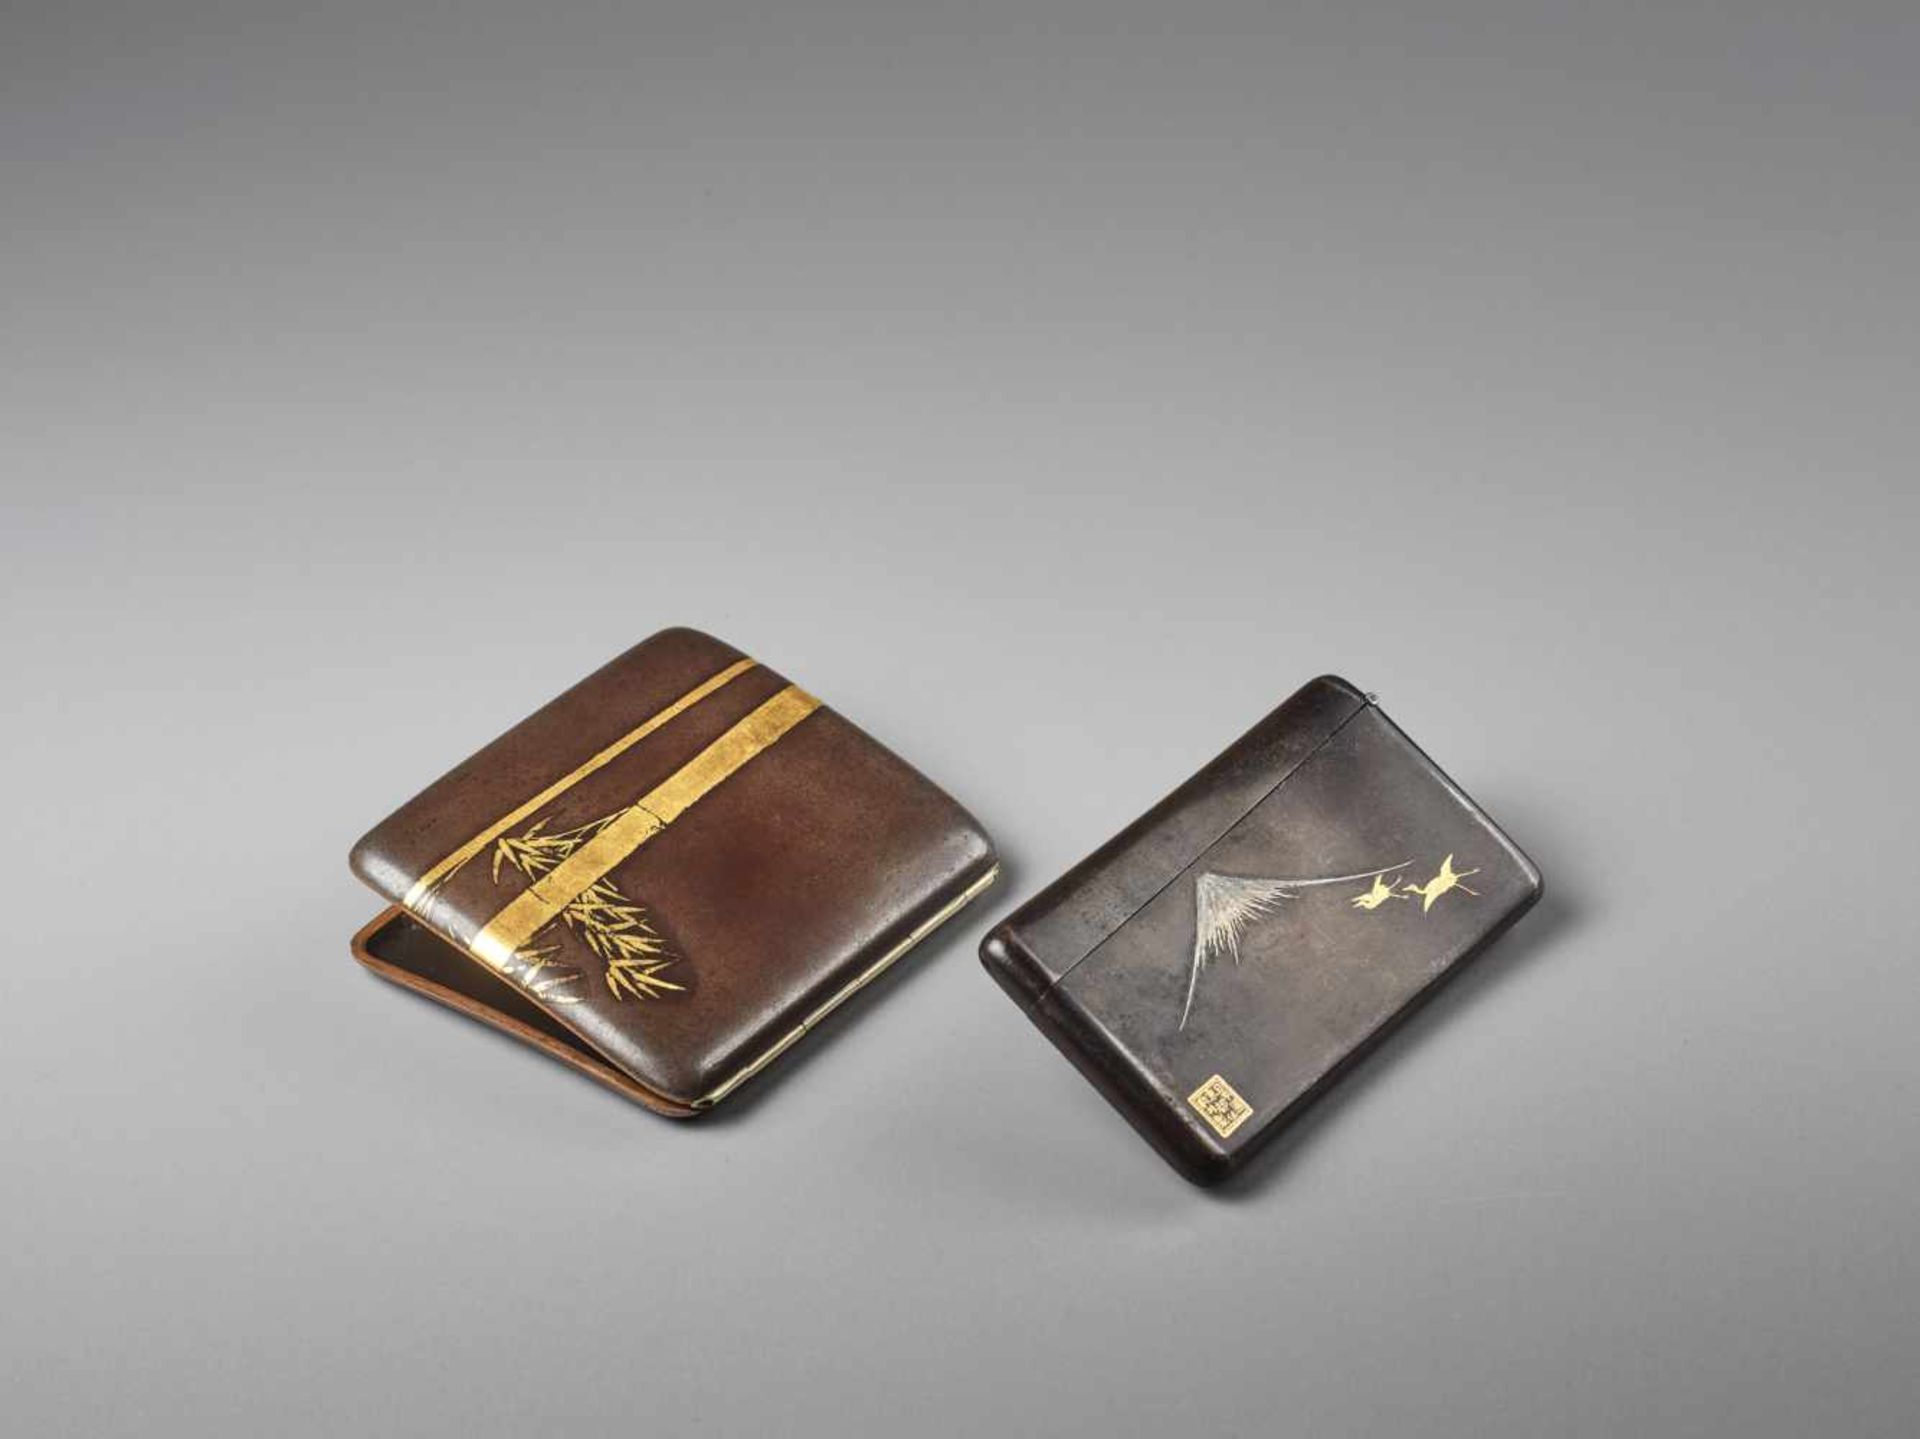 TWO INLAID JAPANESE IRON CIGARETTE CASES BY THE KOMAI COMPANY Iron with goldJapan, Meiji period (